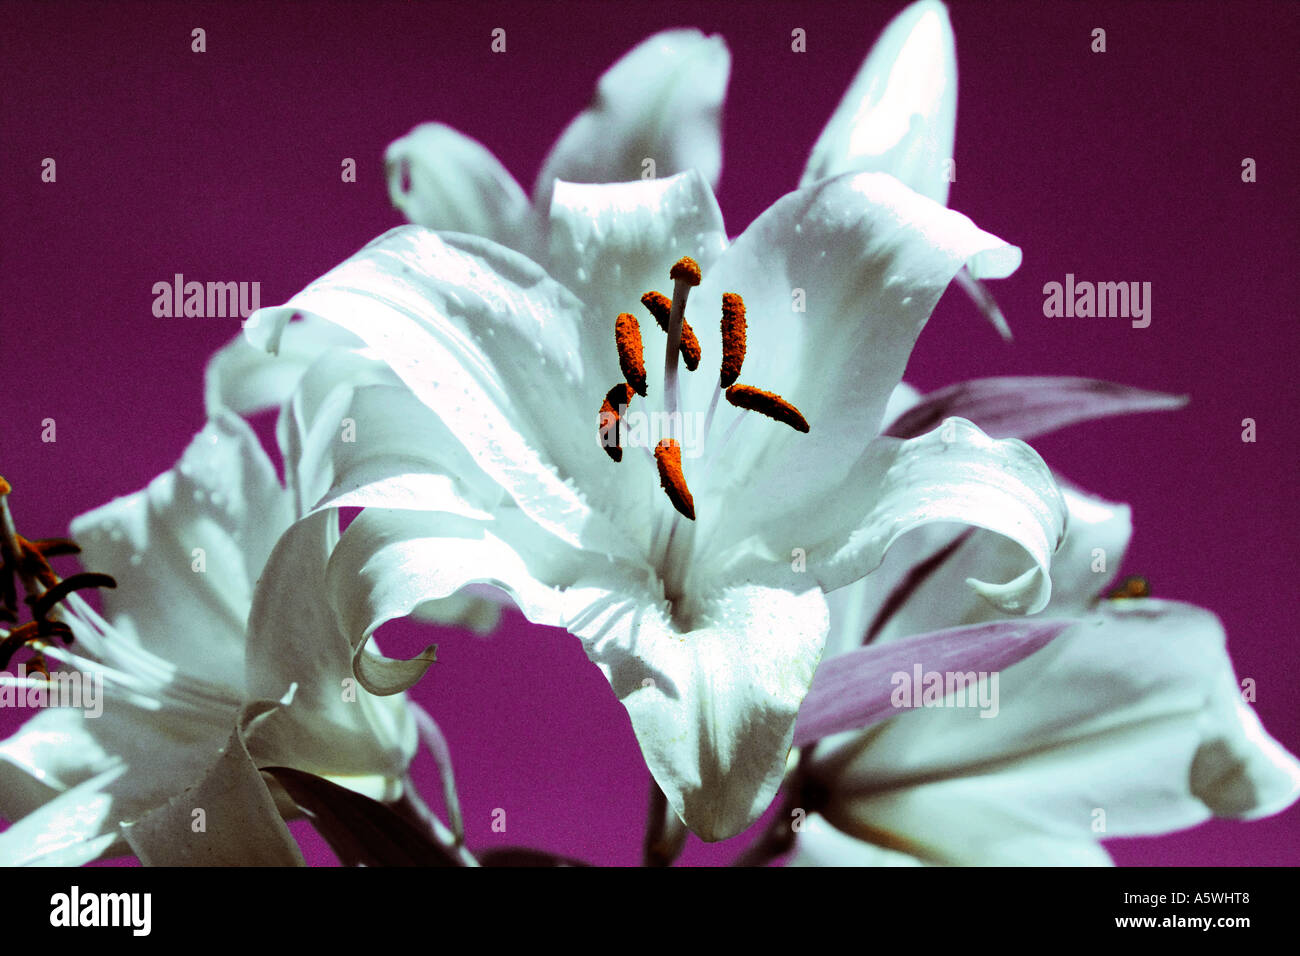 White lilies shot against a deep magenta background Stock Photo